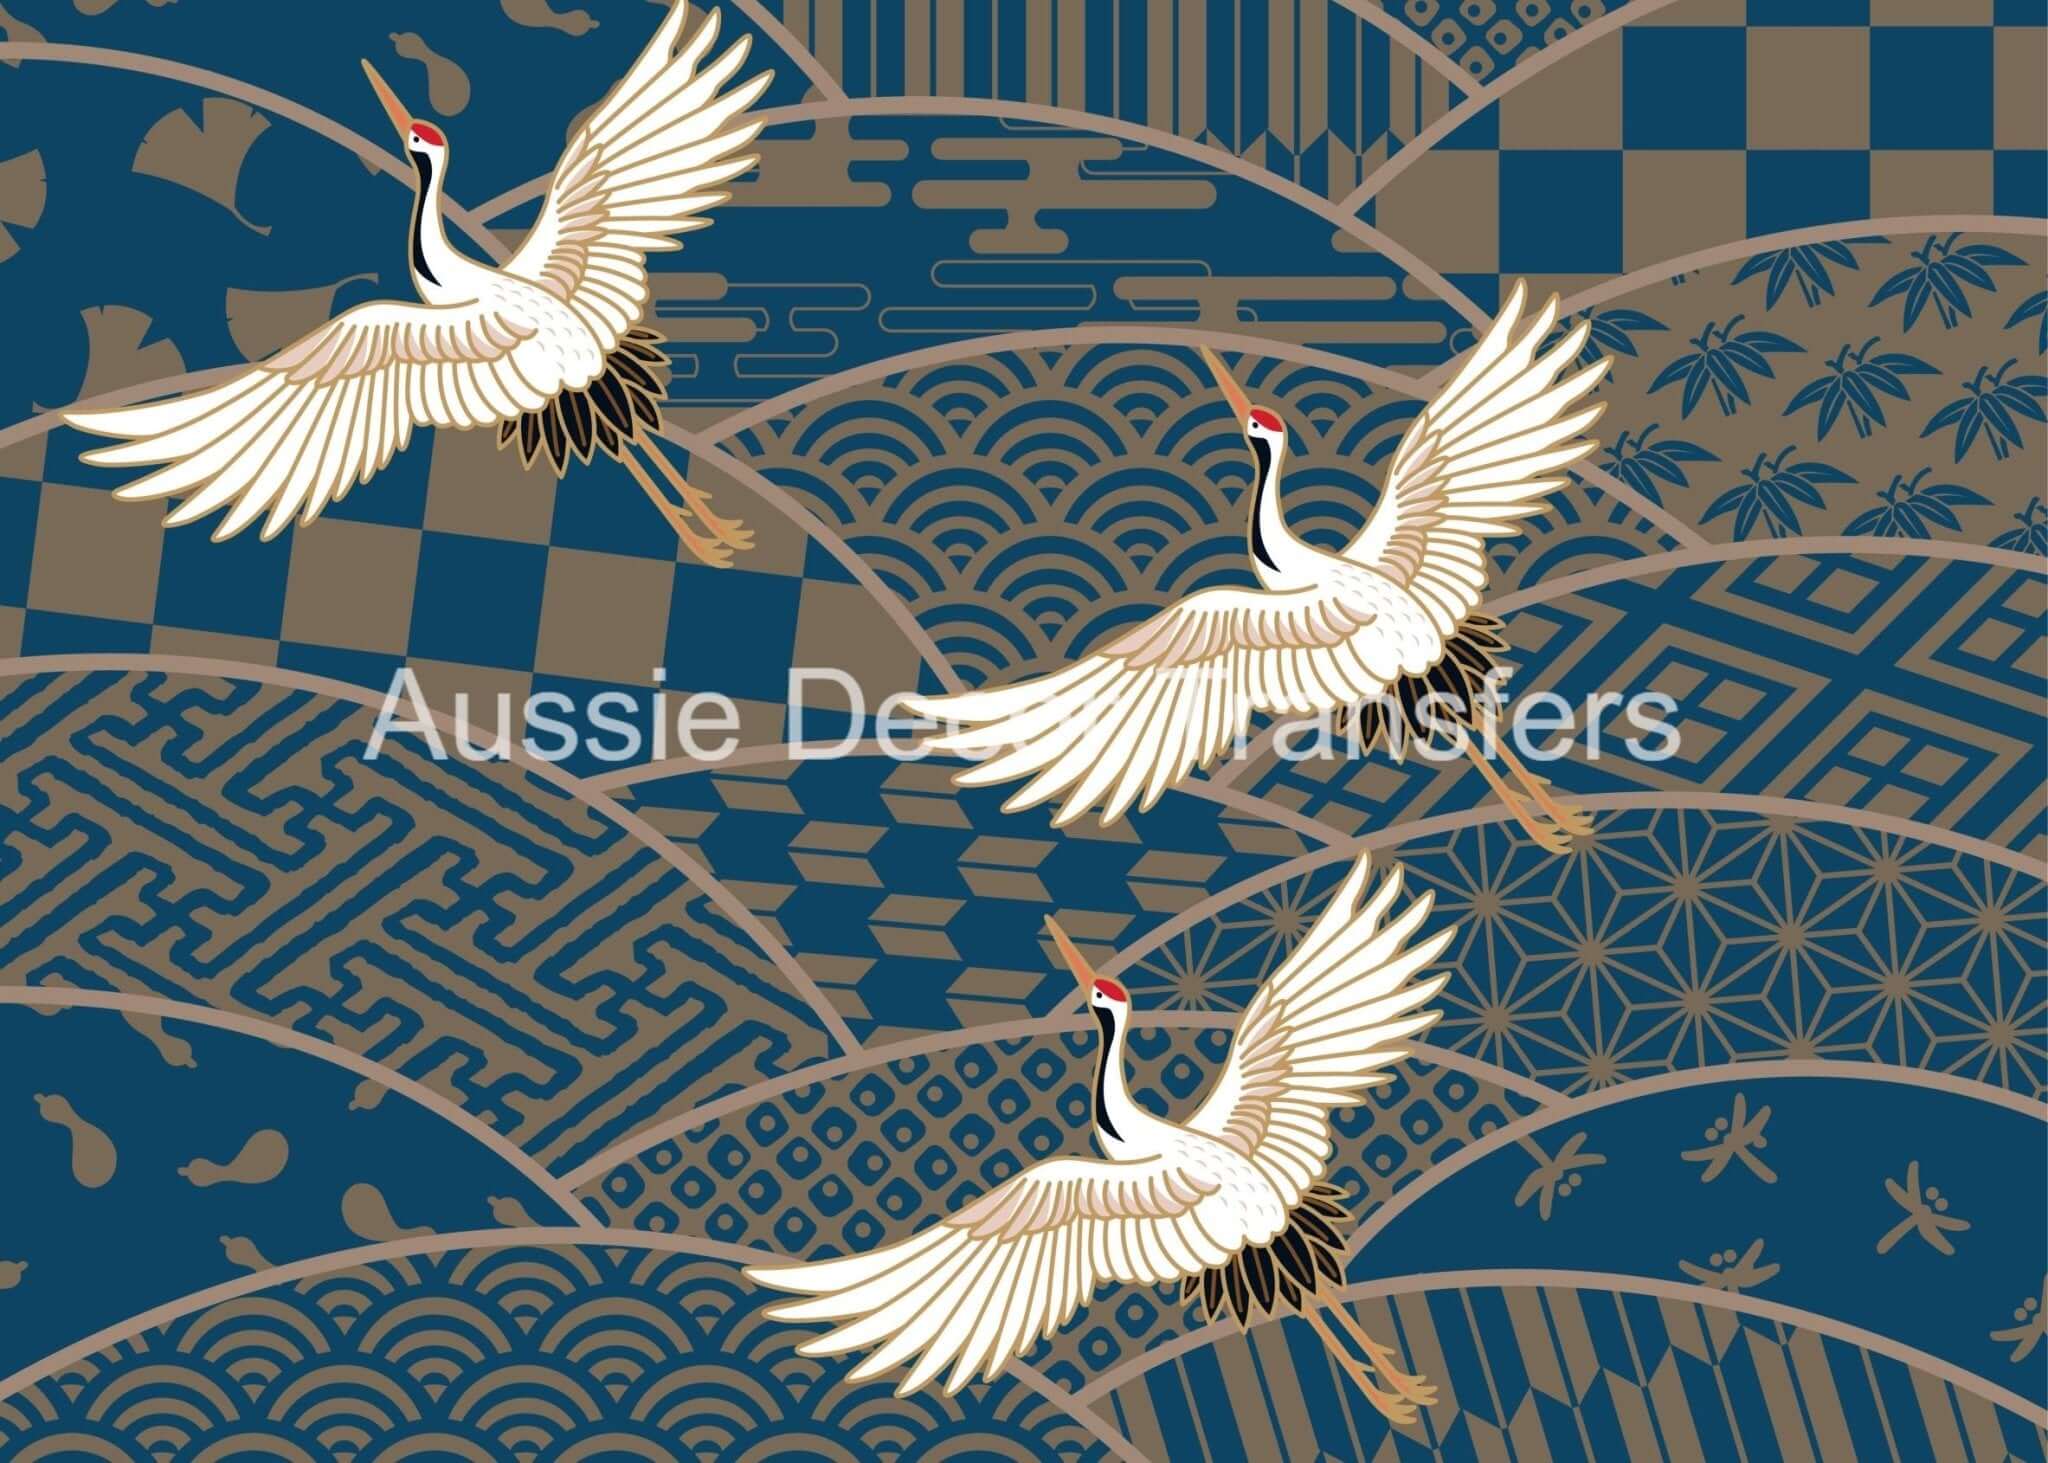 Aussie Decor Transfers Poster Print 3 Cranes in Flight - Not Your Average Poster Print! - AUS ONLY